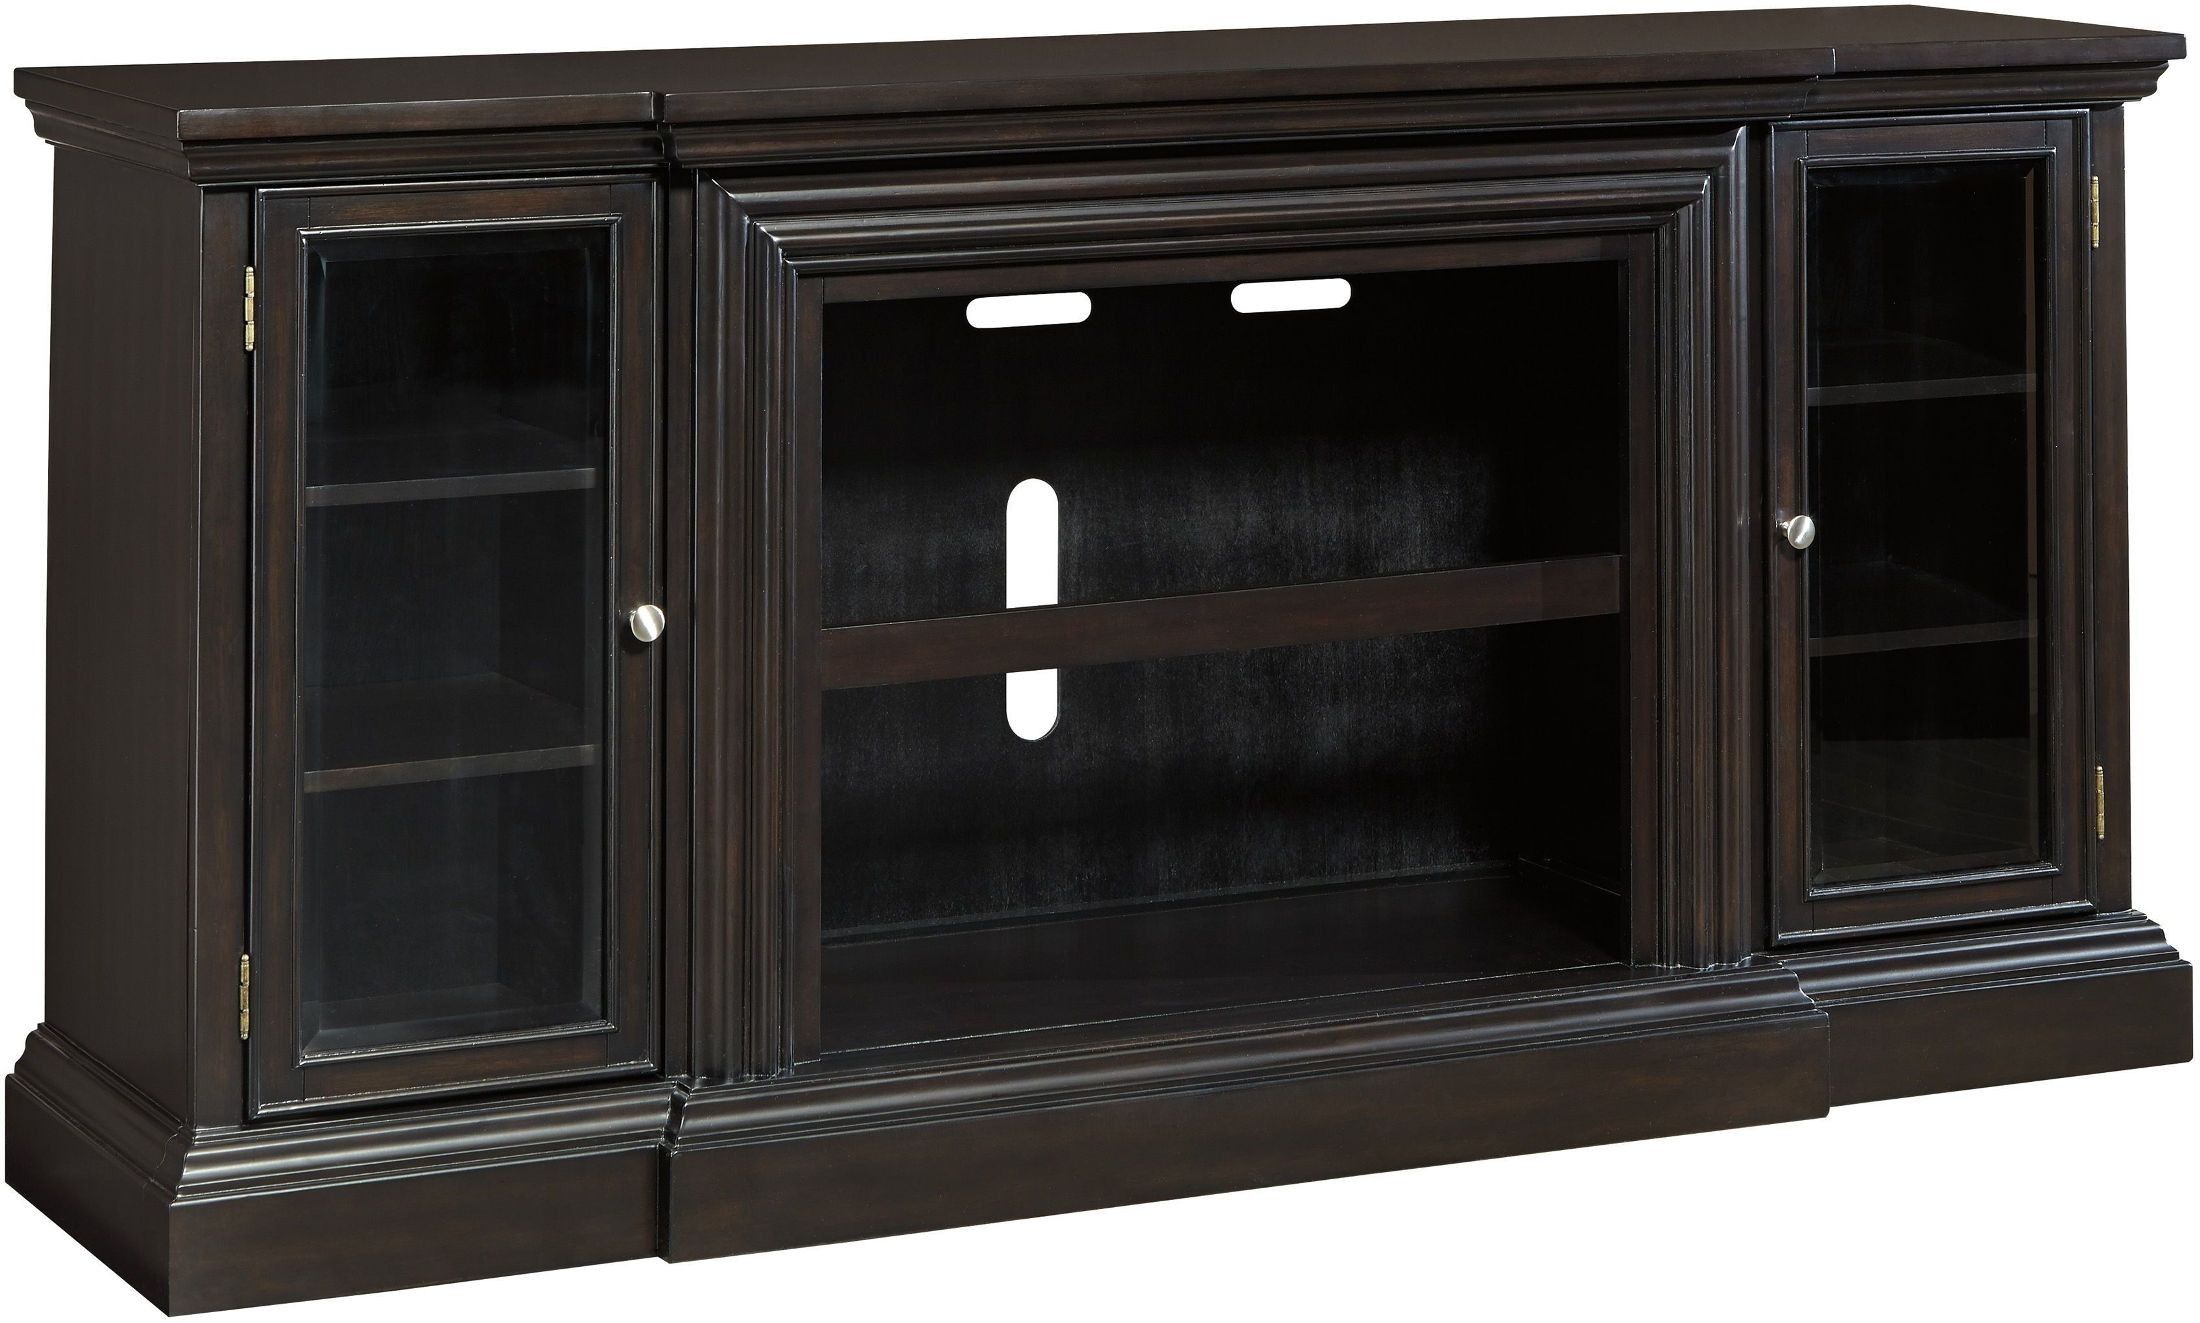 Carlyle Almost Black Extra Large Tv Stand From Ashley Throughout Large Tv Cabinets (View 12 of 15)